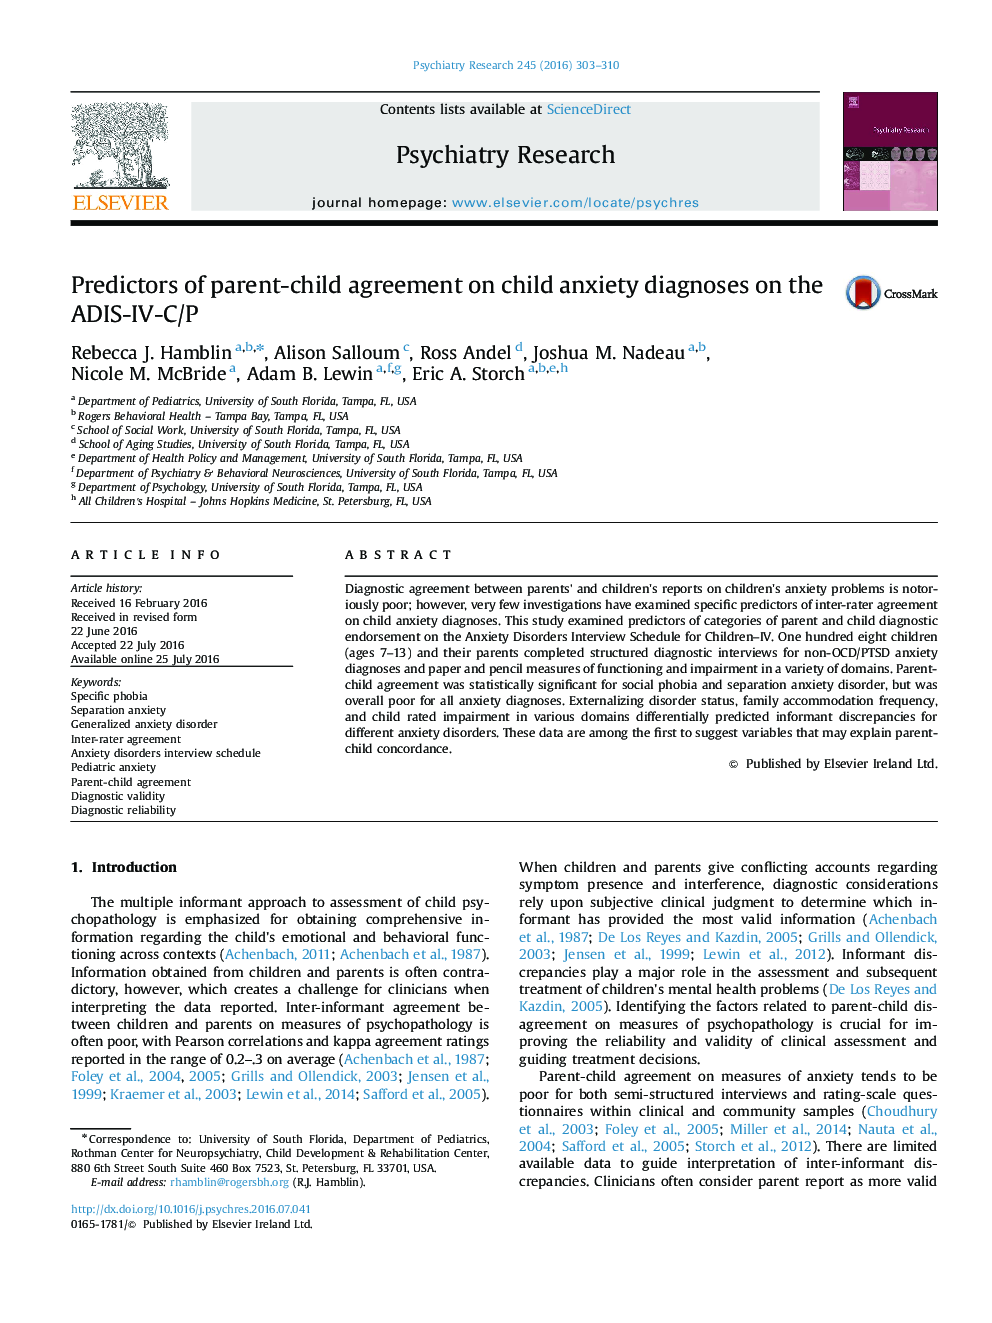 Predictors of parent-child agreement on child anxiety diagnoses on the ADIS-IV-C/P